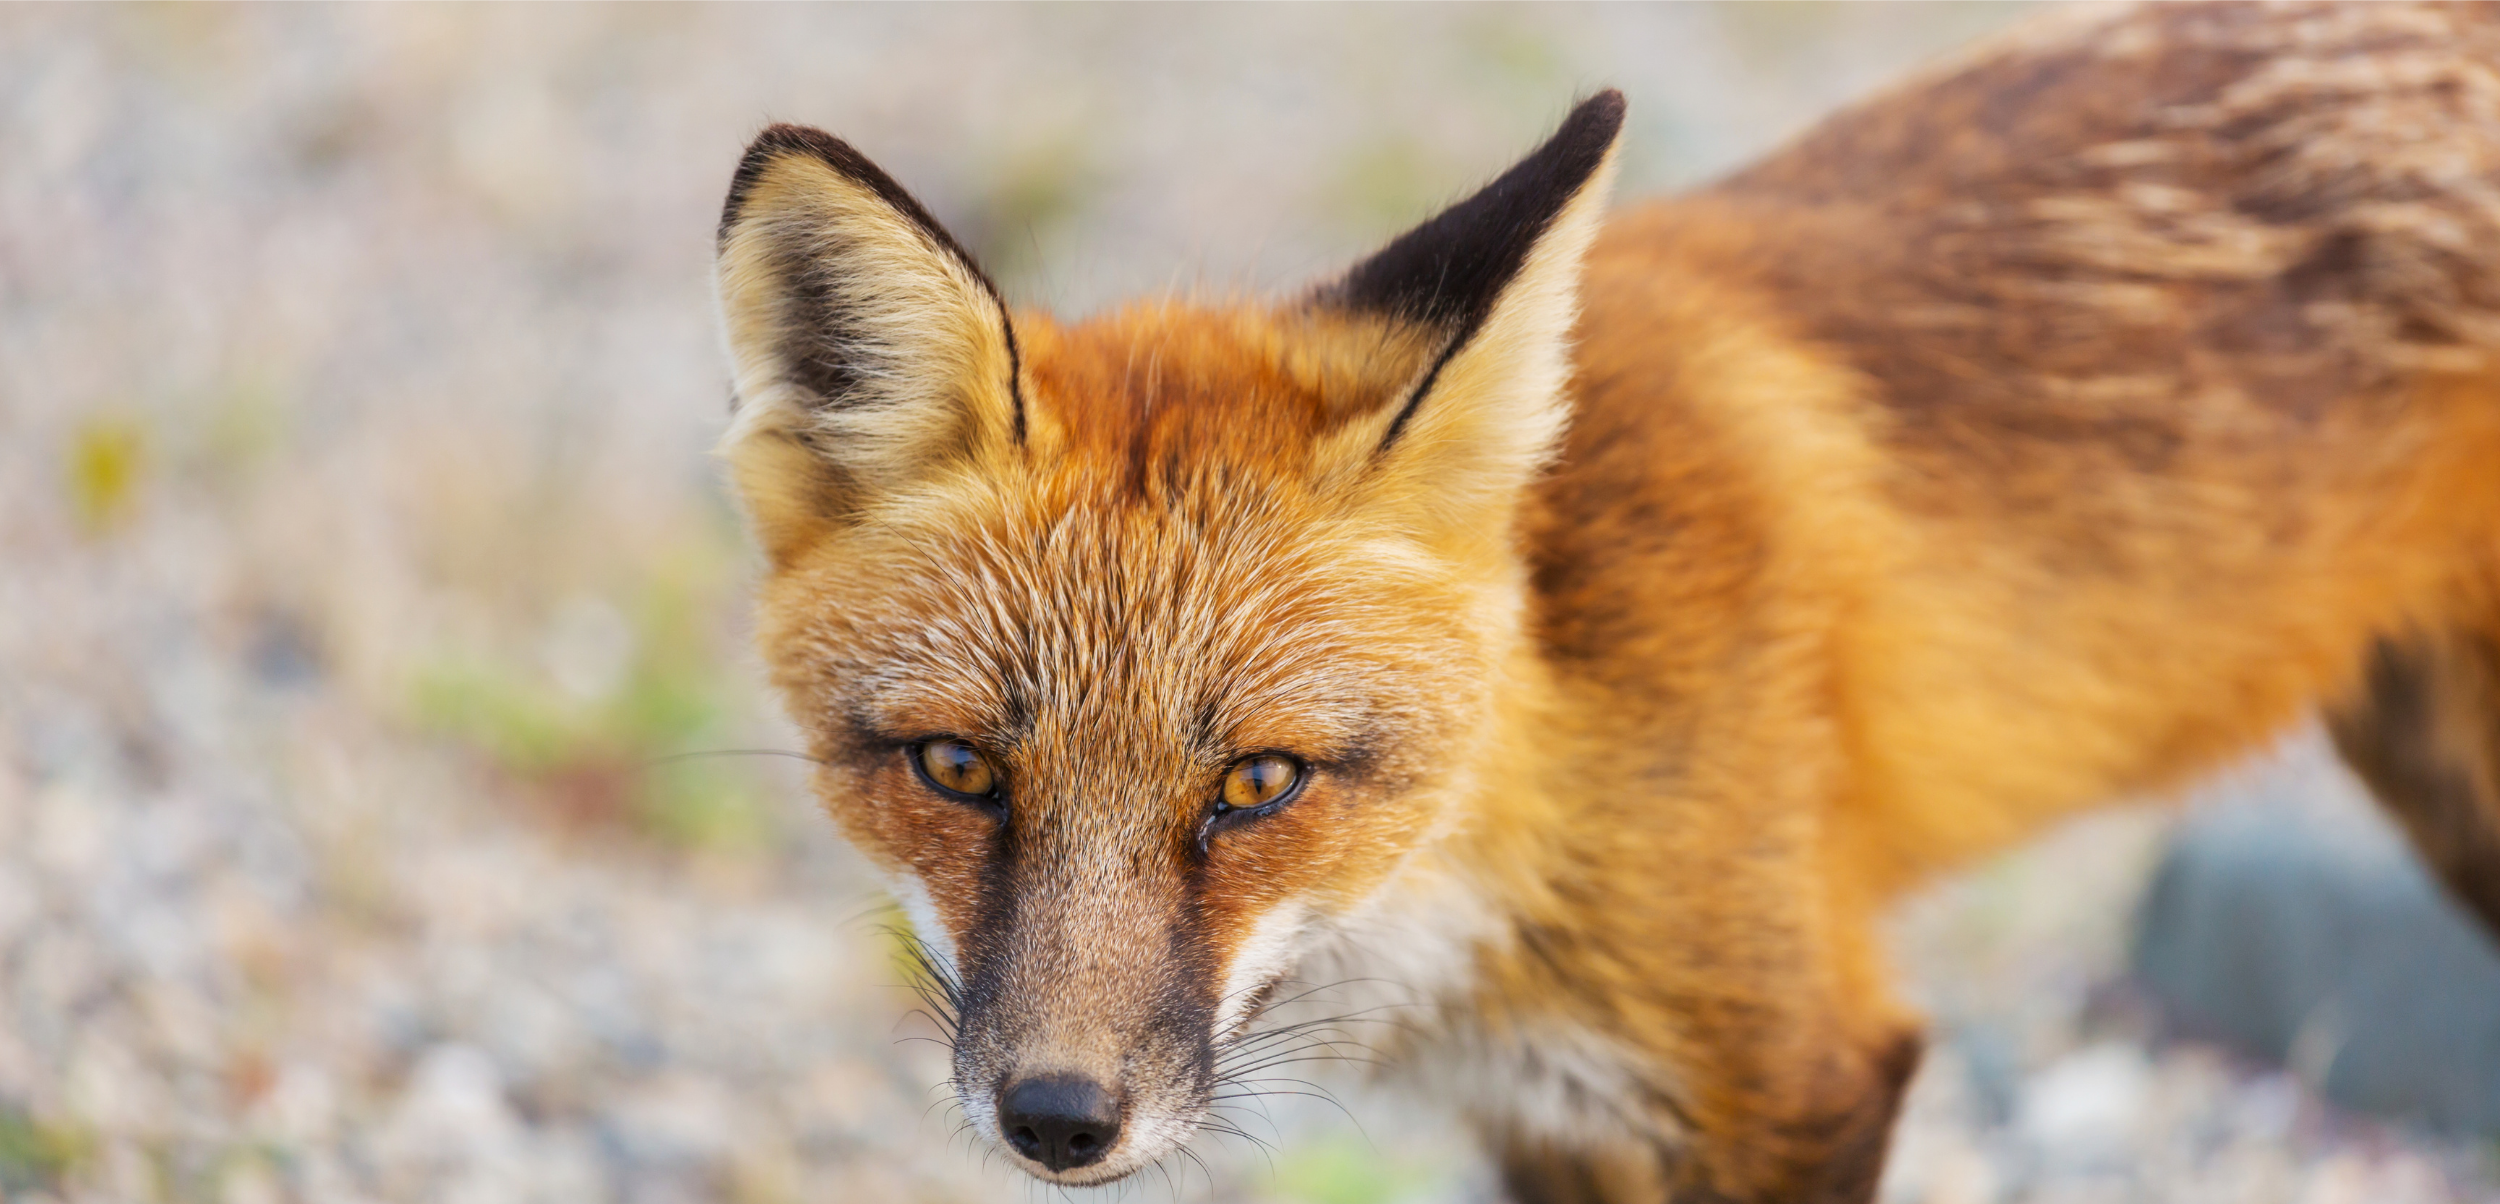   Kodiak Red Fox | Kodiak Marine Charters   Access remote hunting areas around Kodiak, Alaska!  We do drop off/pick up transportation trips or can offer a full package including transportation, lodging and meals for the duration of your DIY hunt! 